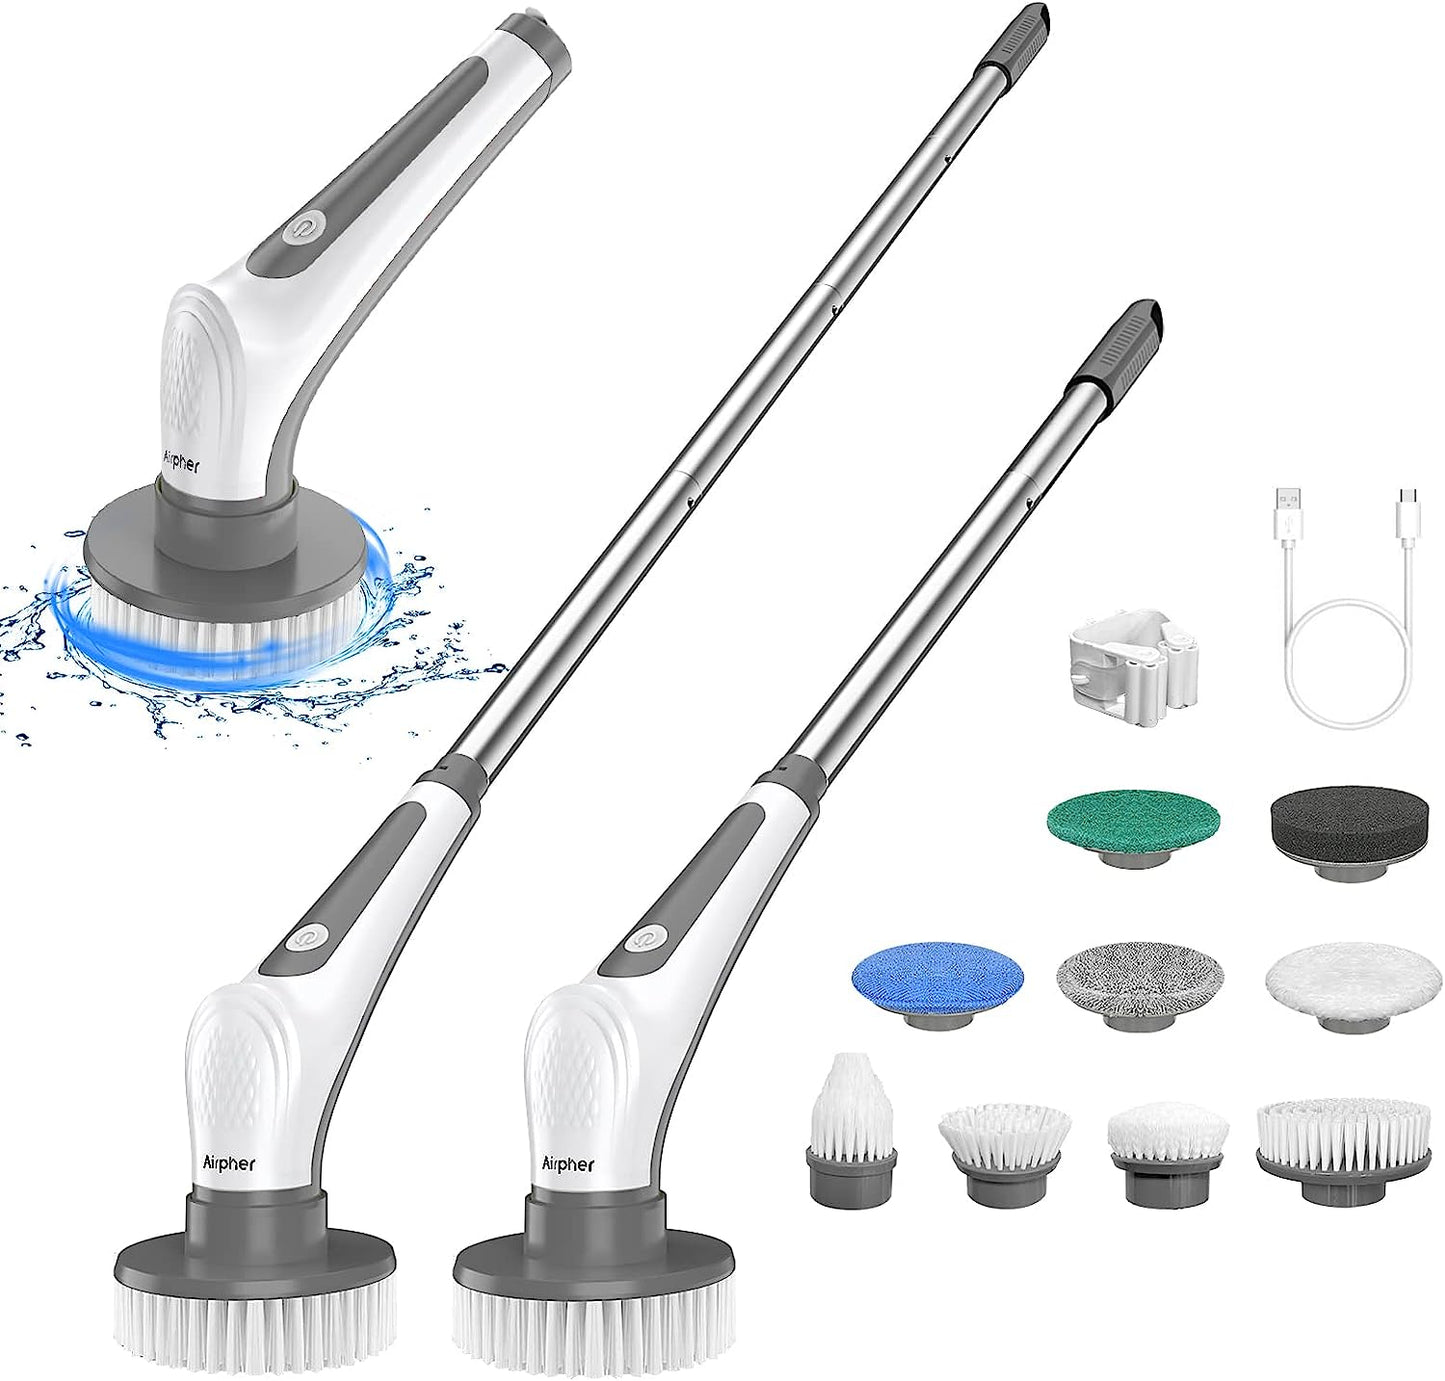 Electric Spin Scrubber, Airpher 10 in 1 Cordless Cleaning Brush IPX8 with 9 Replaceable Brush Heads and 4 Section Removable Rod